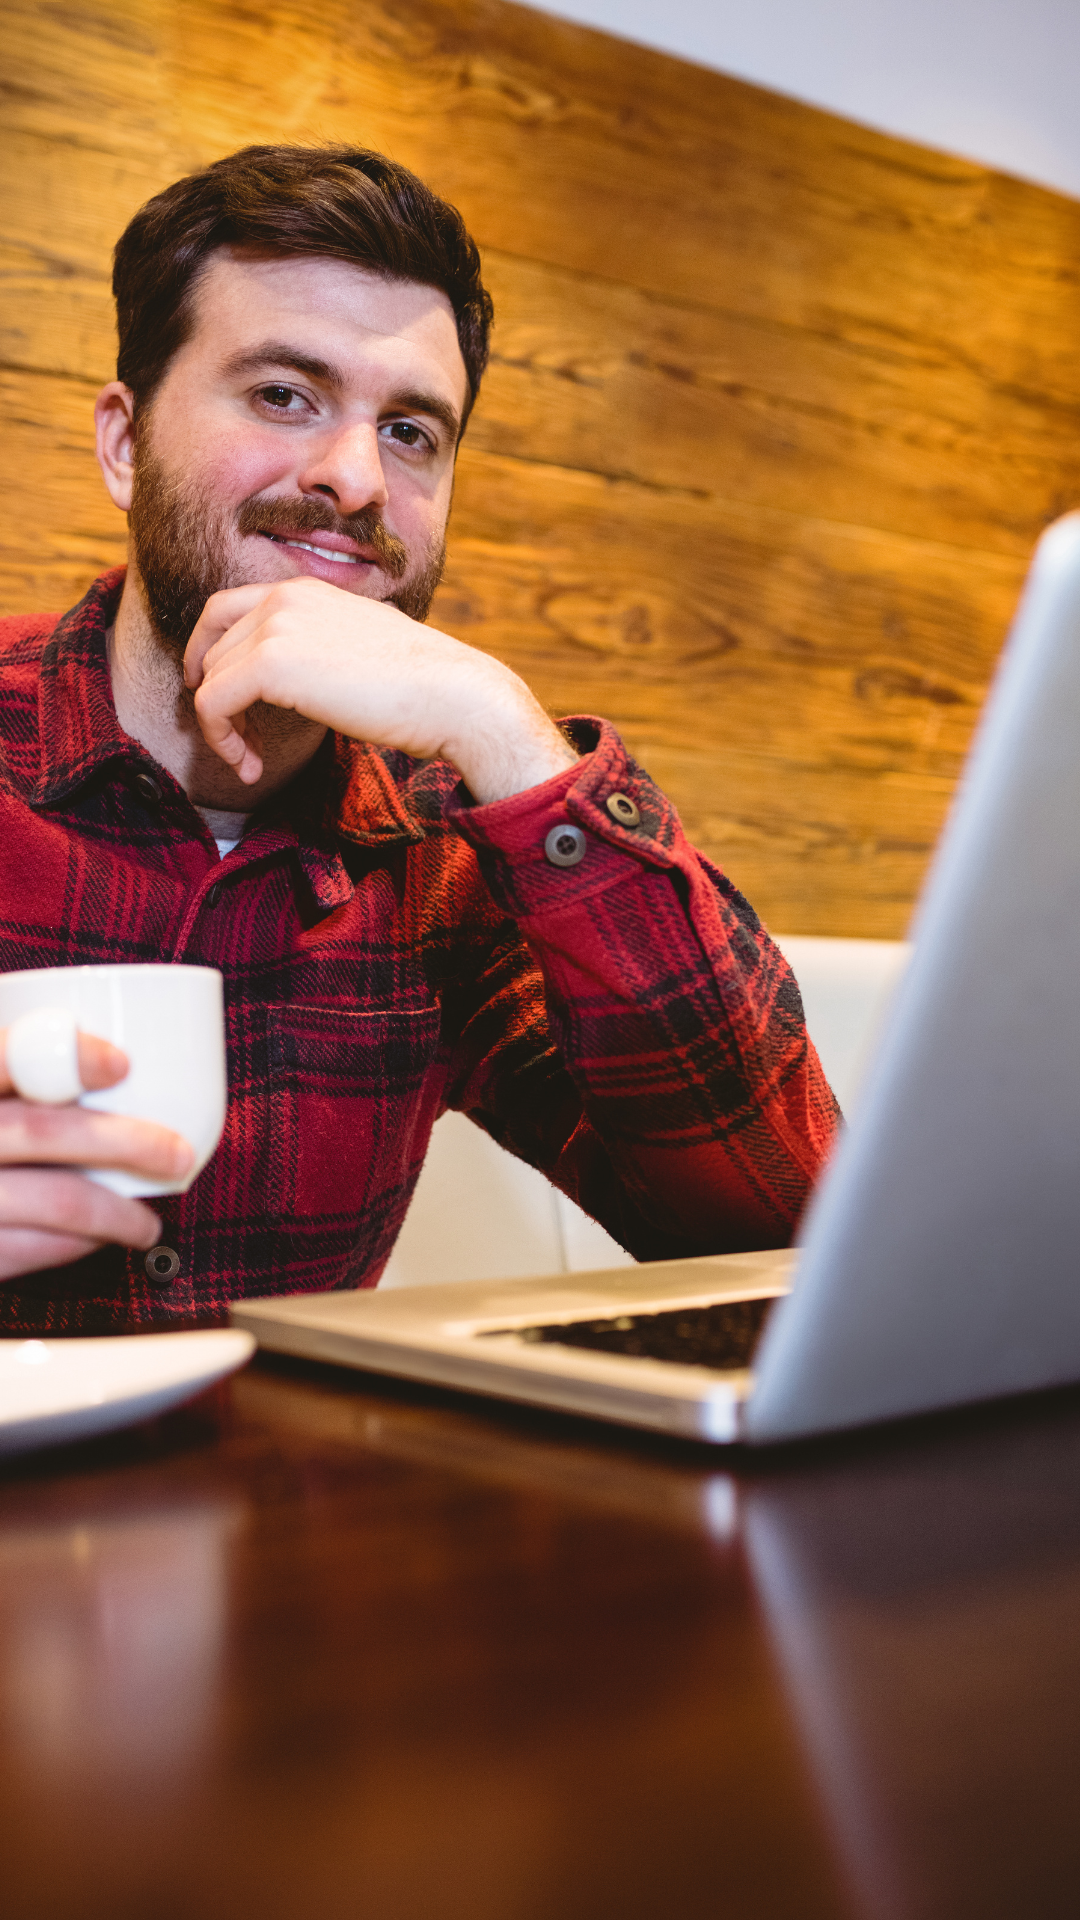 Dark haired, bearded man in red and black flannel shirt smiles as he lifts a white cup of coffee with his right hand, holds his chin with his left hand, left elbow and laptop sit on wood table in front of him